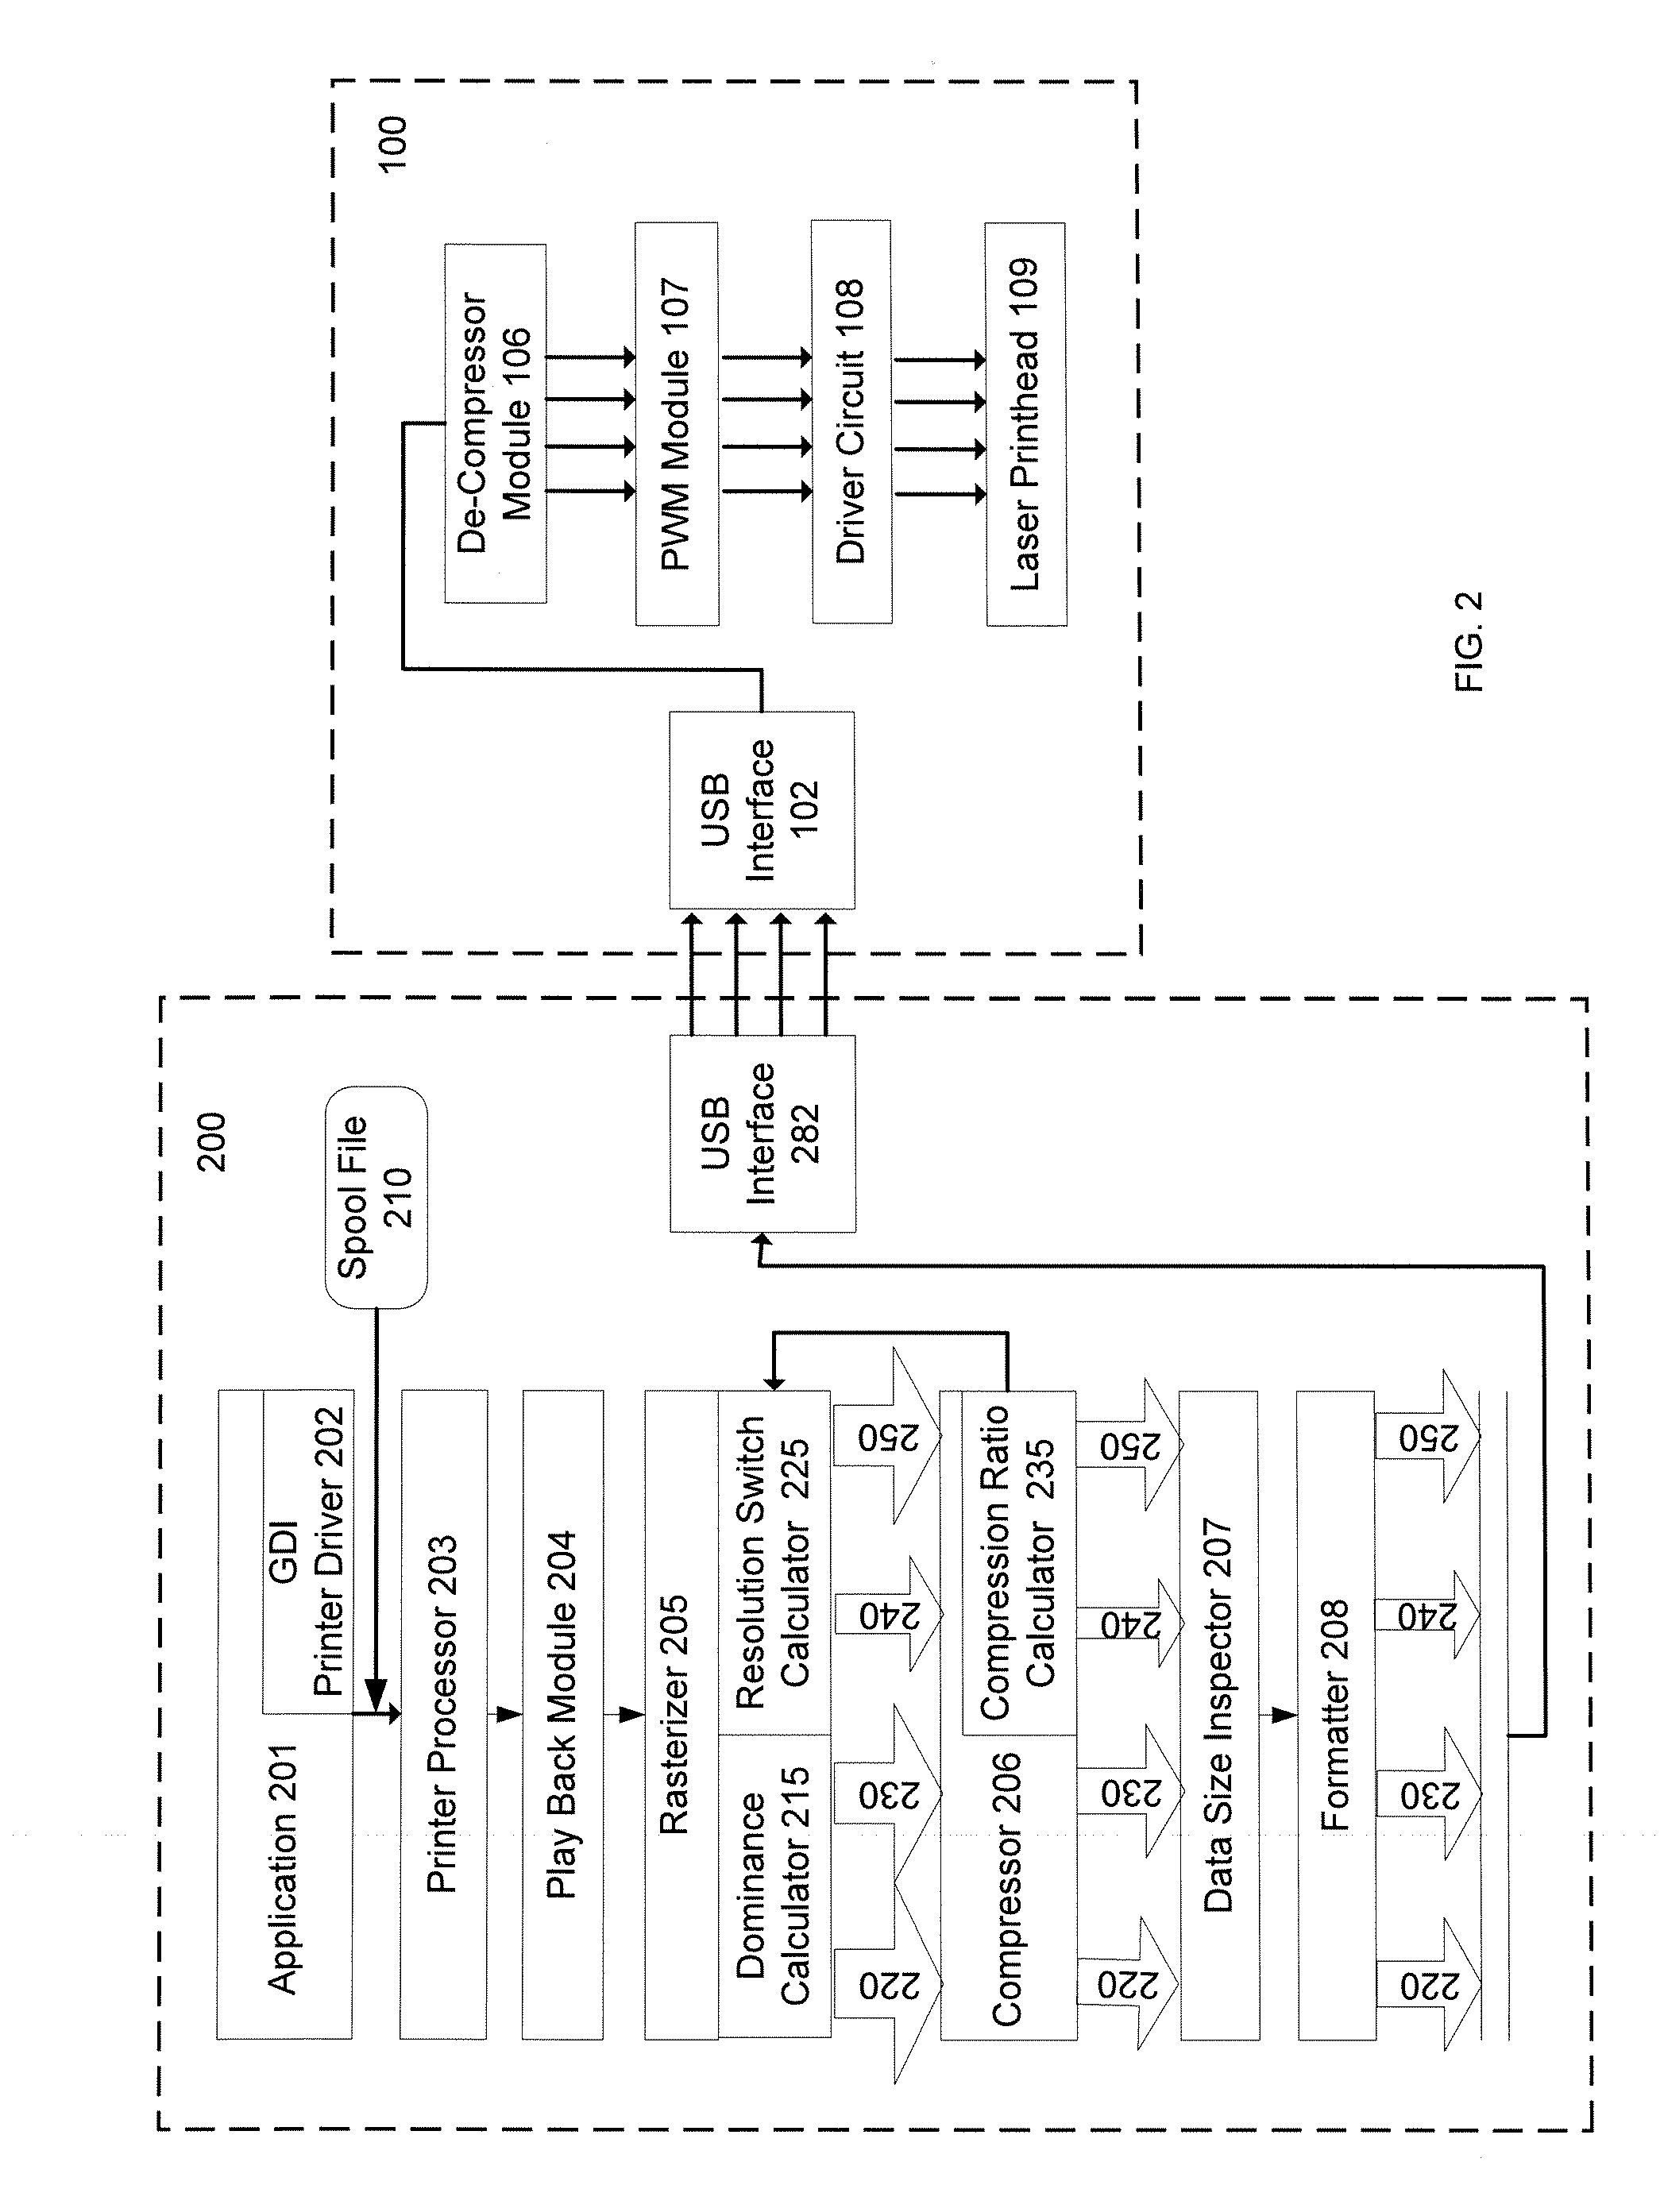 Systems and Methods for Color Data Compression